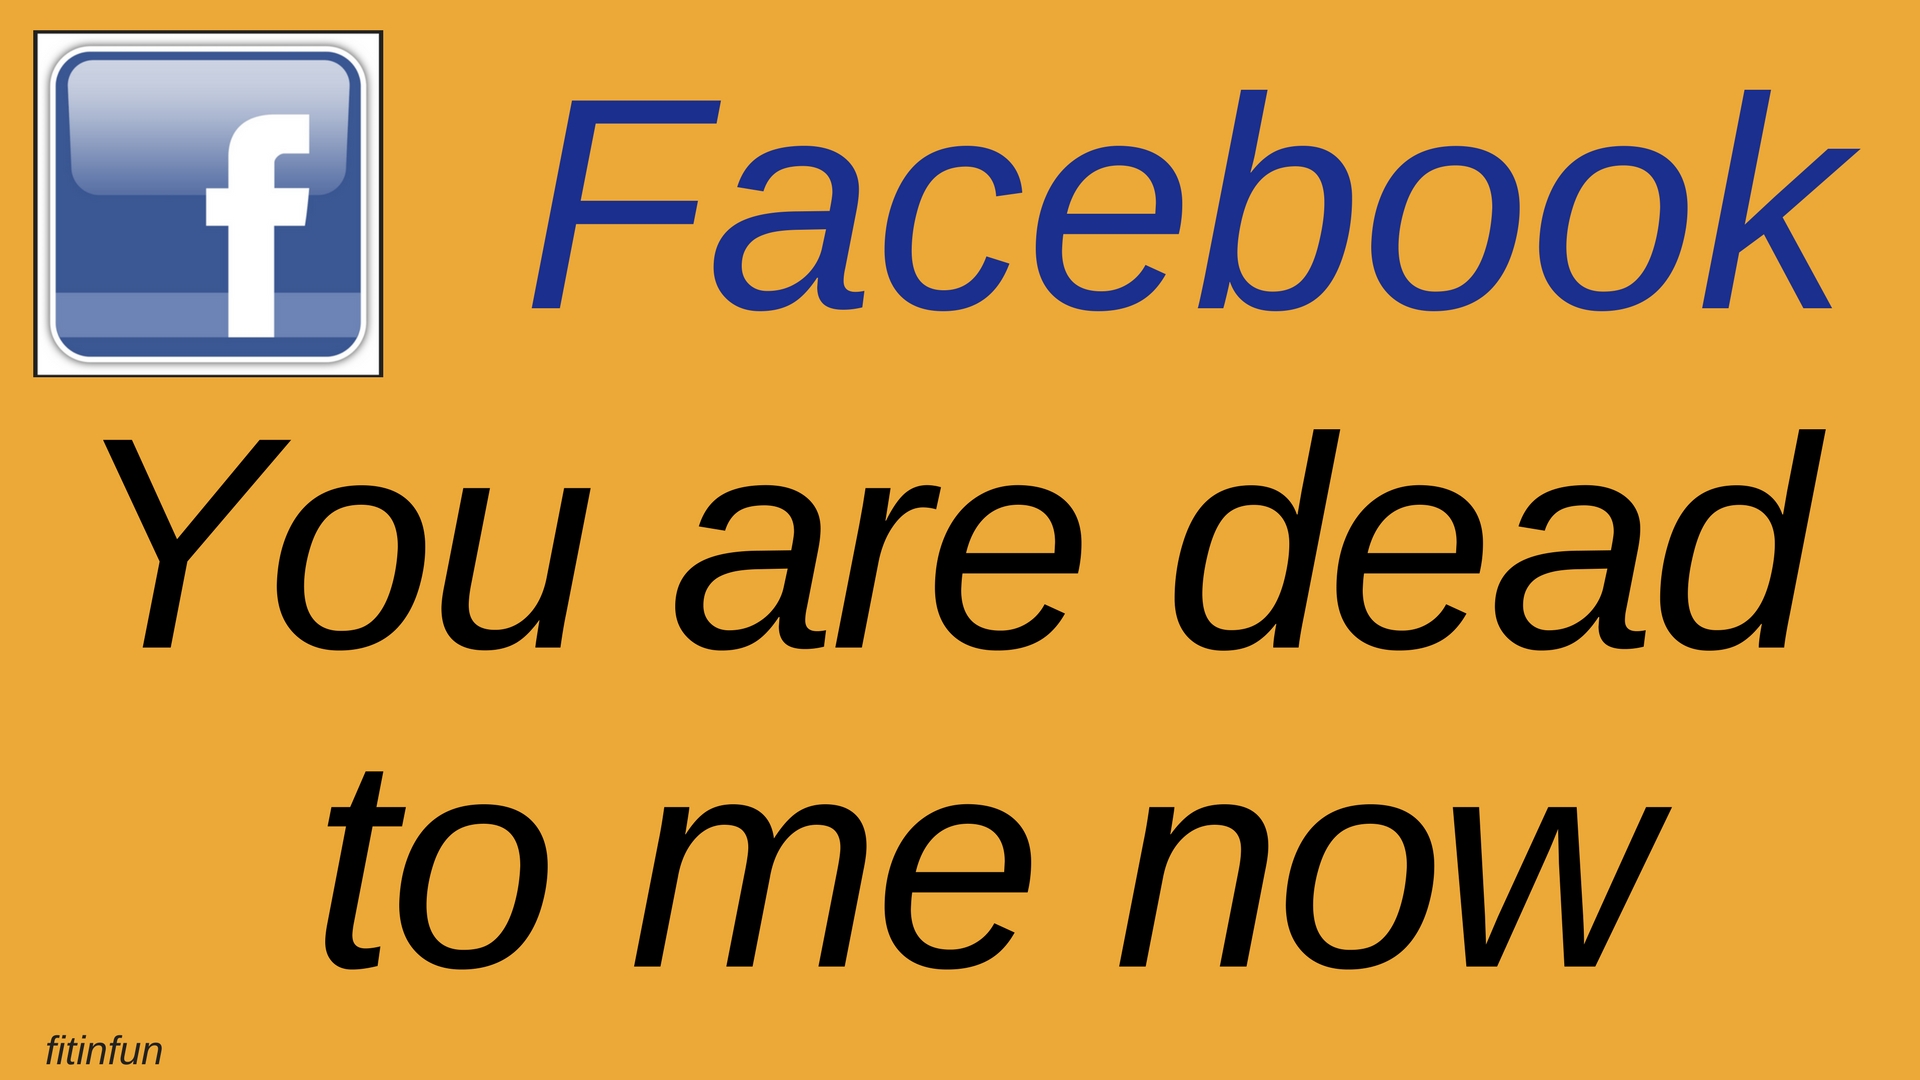 Facebook you are dead to me now fitinfun.jpg